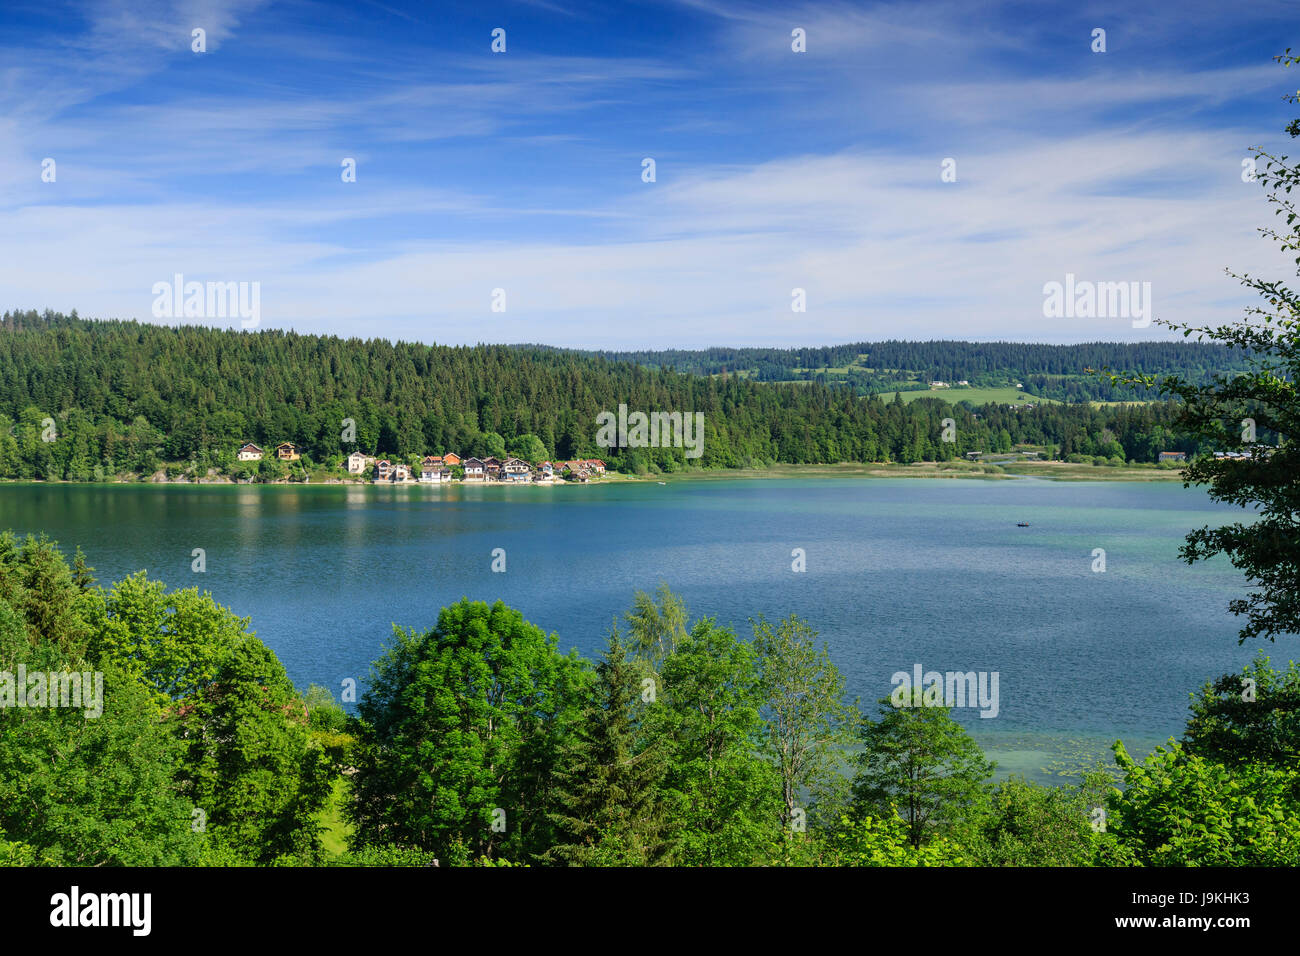 France, Doubs, Jura Mountains, Les Grangettes and Montperreux, Saint-Point lake, and the small houses of Port Titi Stock Photo